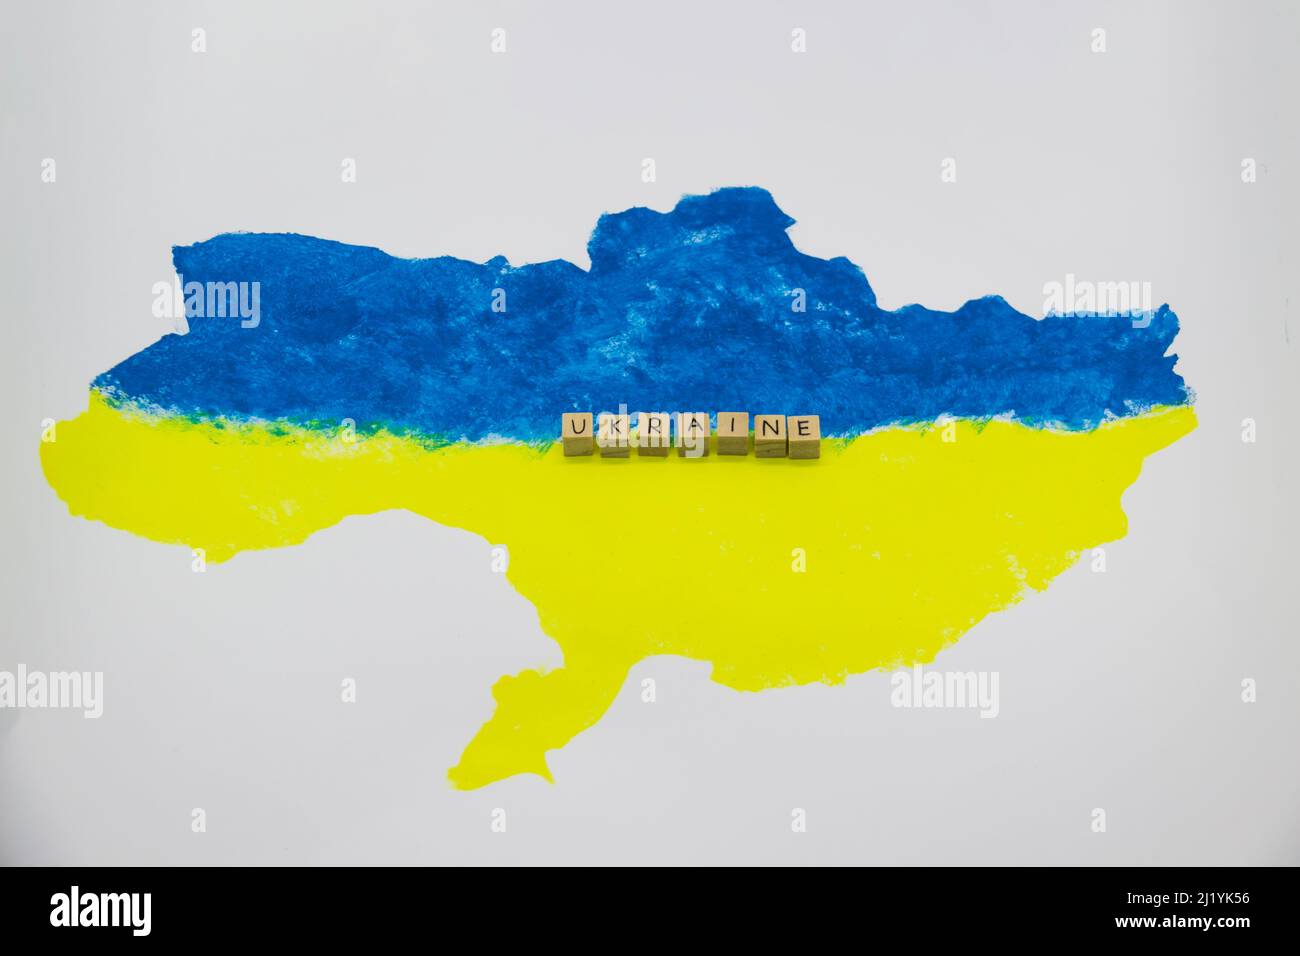 The word Ukraine written on wood cubes on background with Ukrainian map in blue and yellow colors Stock Photo